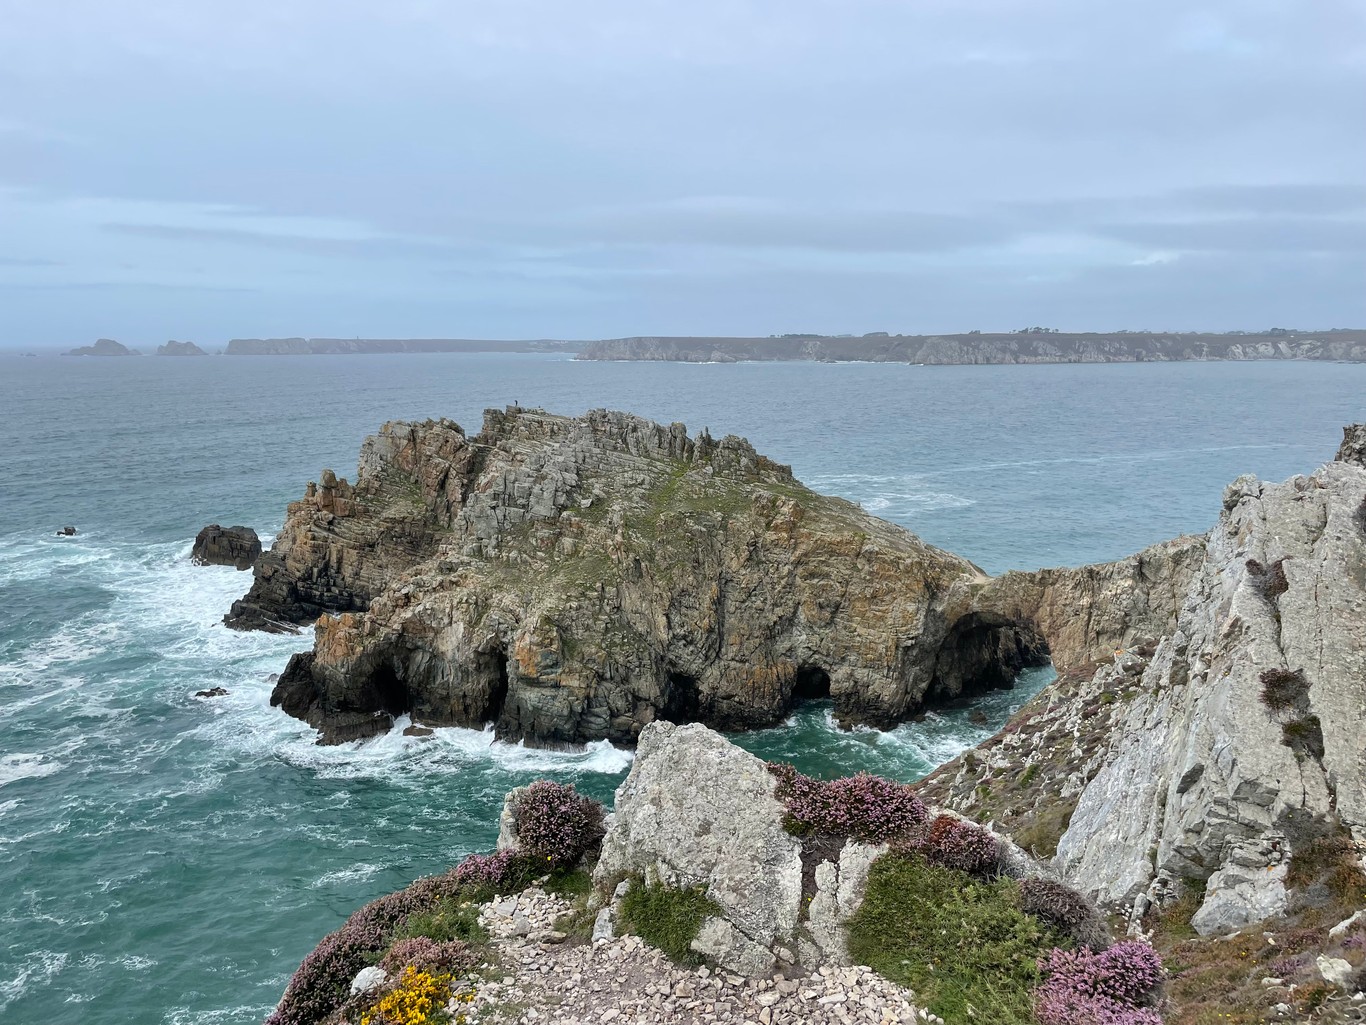 A rocky outcrop surrounded by the sea, connected to the land via a natural narrow rock bridge